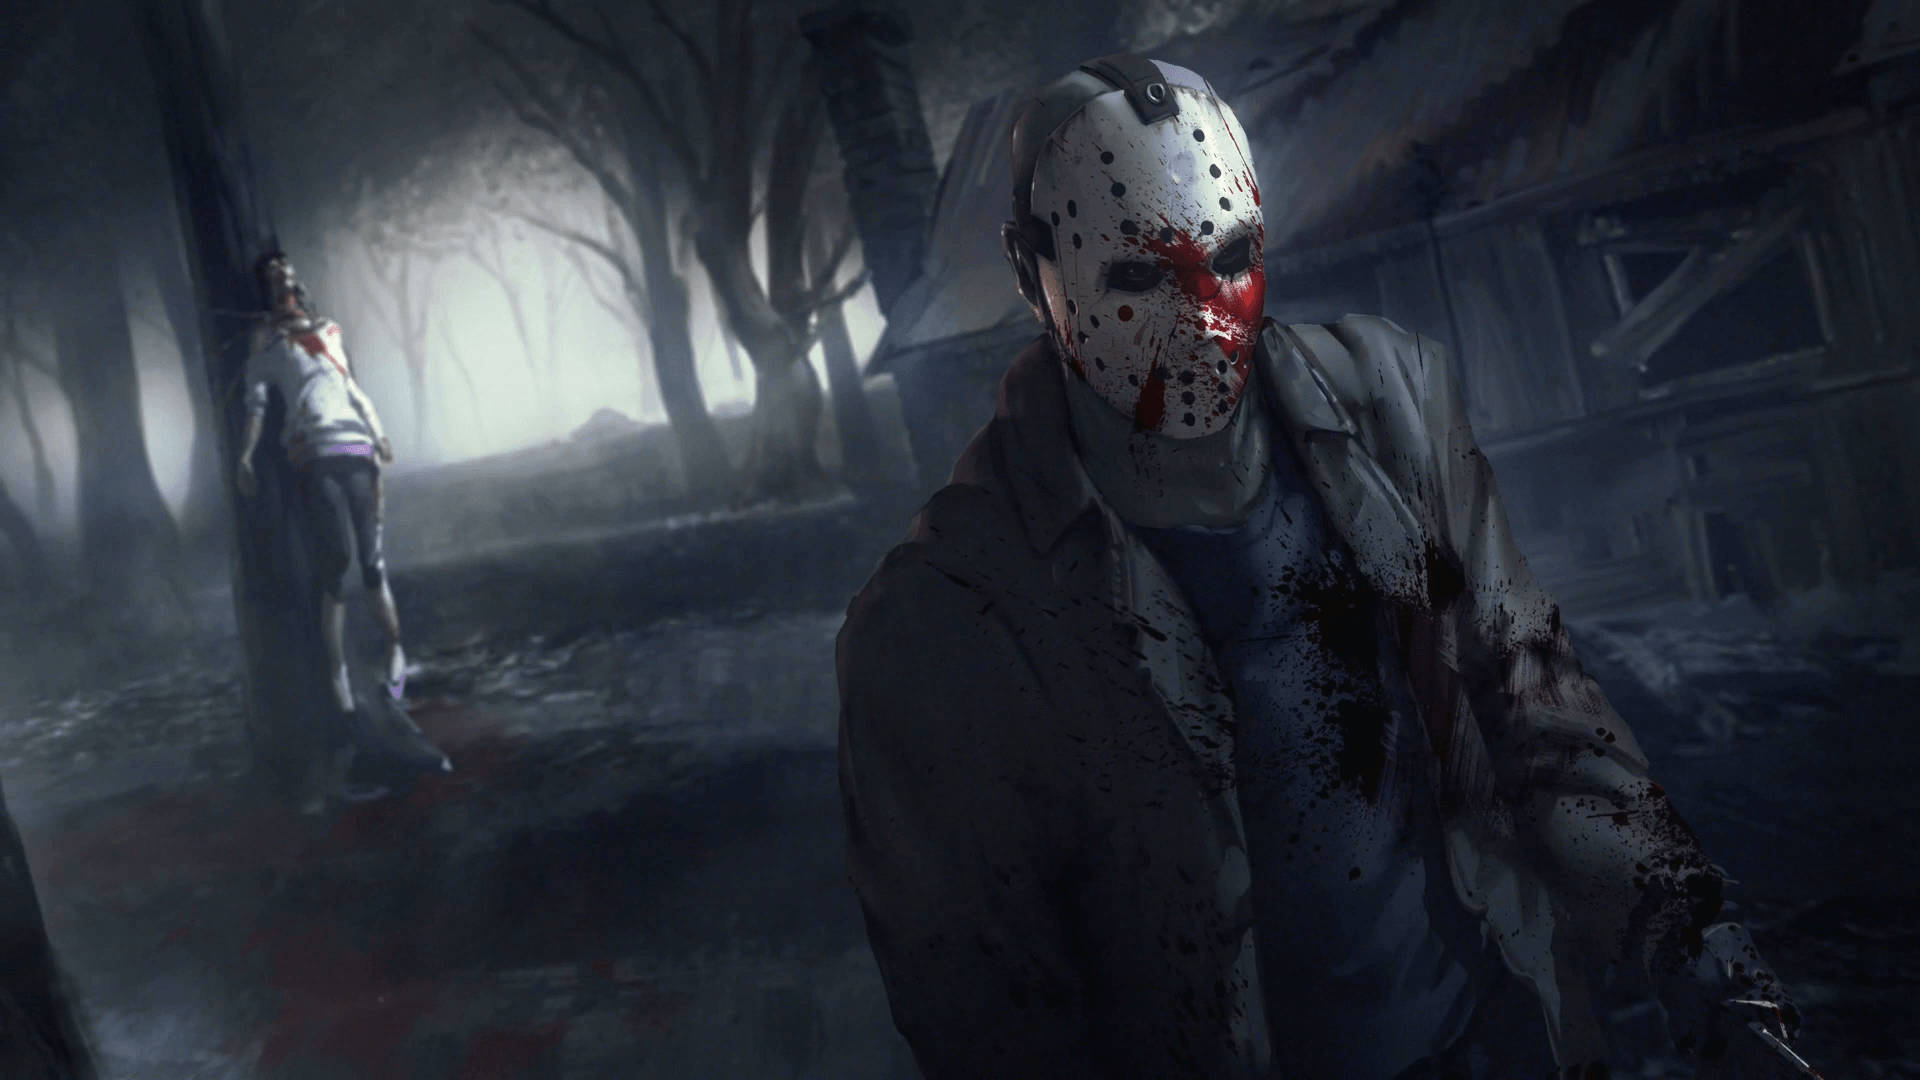 Friday The 13th Final Credit Scene Wallpaper